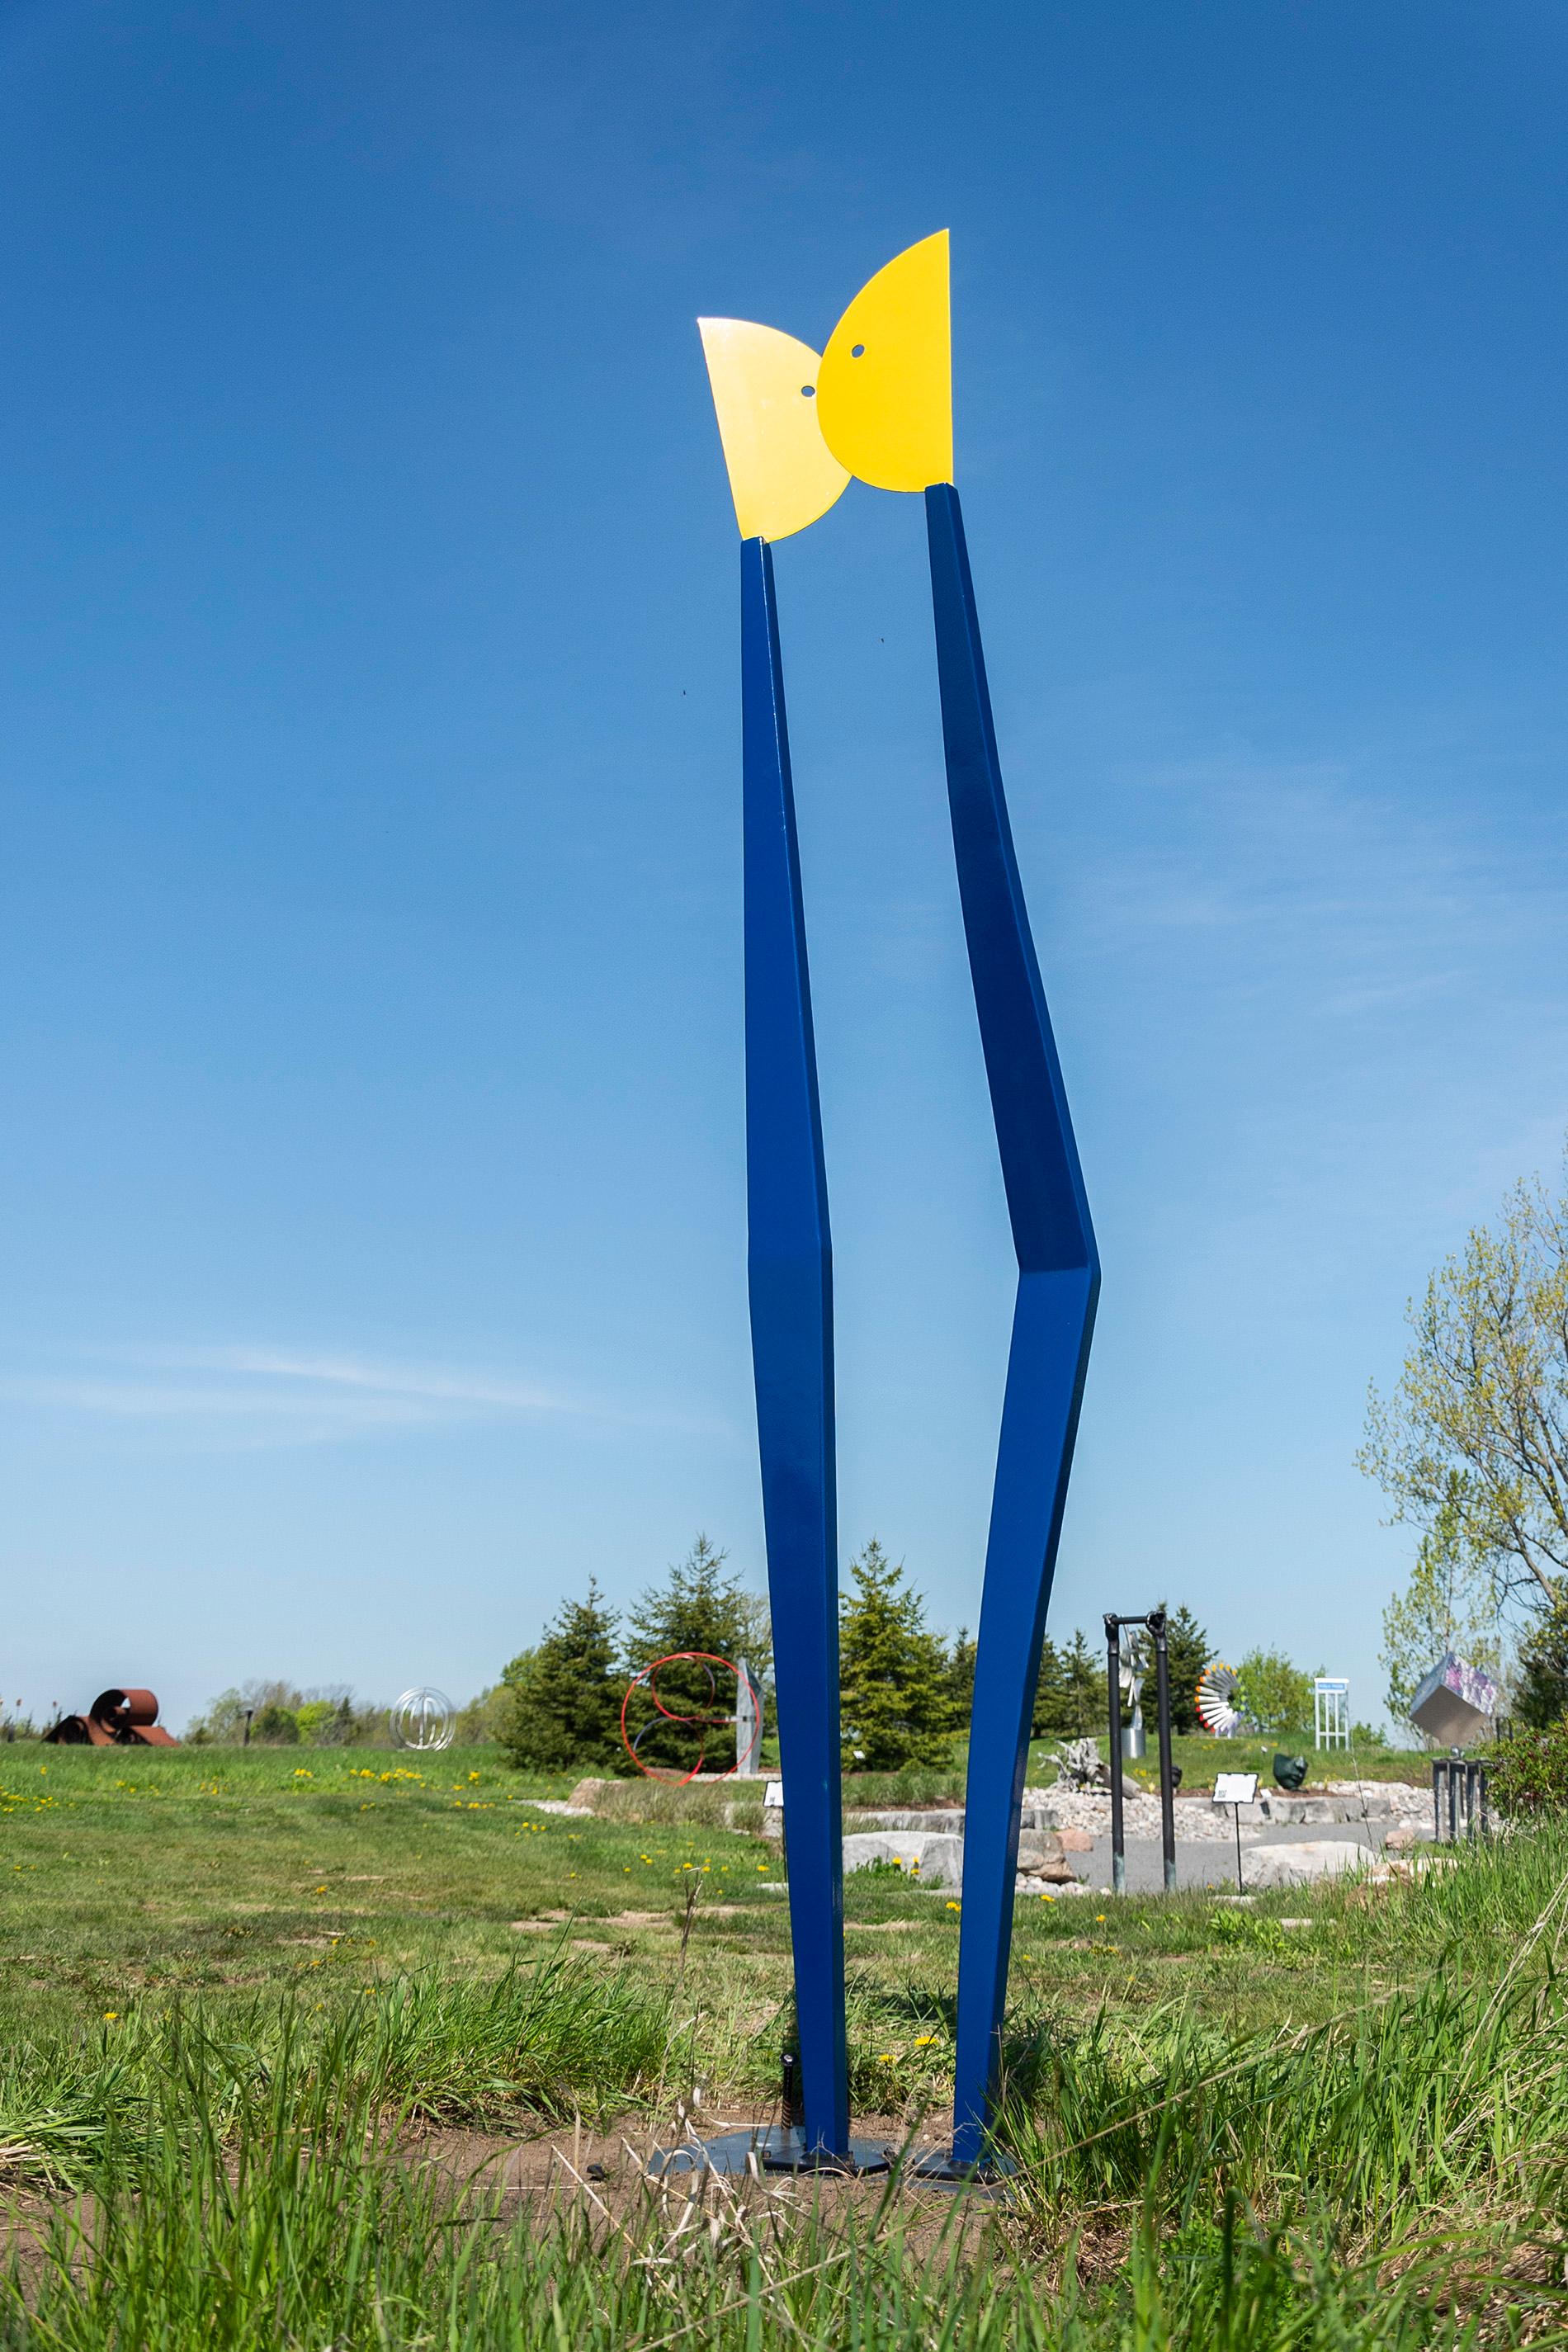 R. Clark Ellis Abstract Sculpture - Facetime - tall, colourful, abstracted figures, aluminum outdoor sculpture